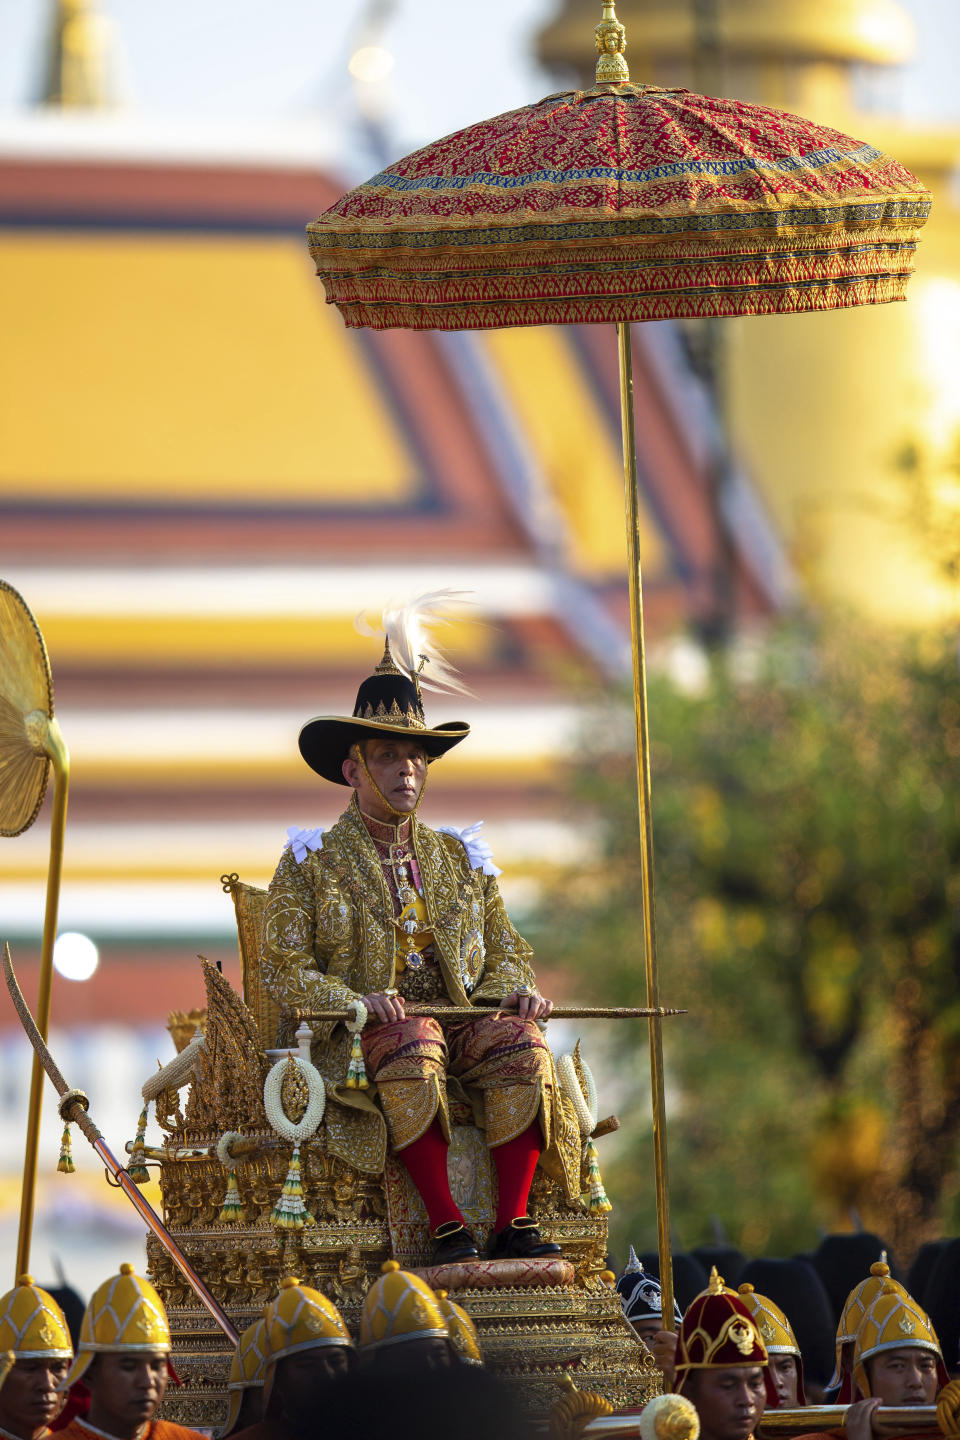 Thailand’s King Maha Vajiralongkorn is carried on a palanquin through the streets outside the Grand Palace for the public to pay homage during the second day of his coronation ceremony in Bangkok, Sunday, May 5, 2019. Vajiralongkorn was officially crowned Saturday amid the splendor of the country's Grand Palace, taking the central role in an elaborate centuries-old royal ceremony that was last held almost seven decades ago. (AP Photo/Wason Wanichorn)